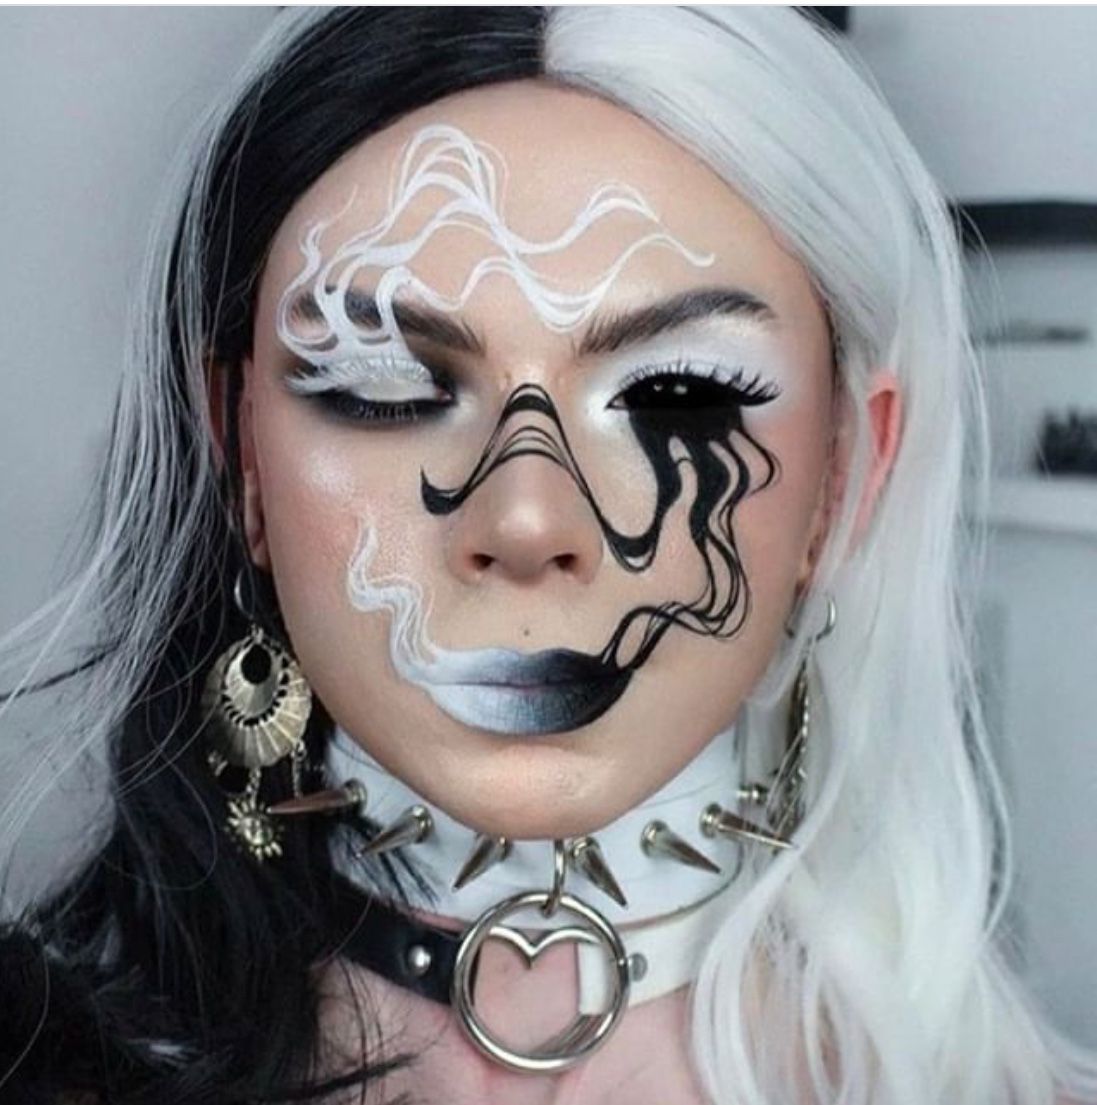 Unique and Scary Skeleton Makeup
Inspiration